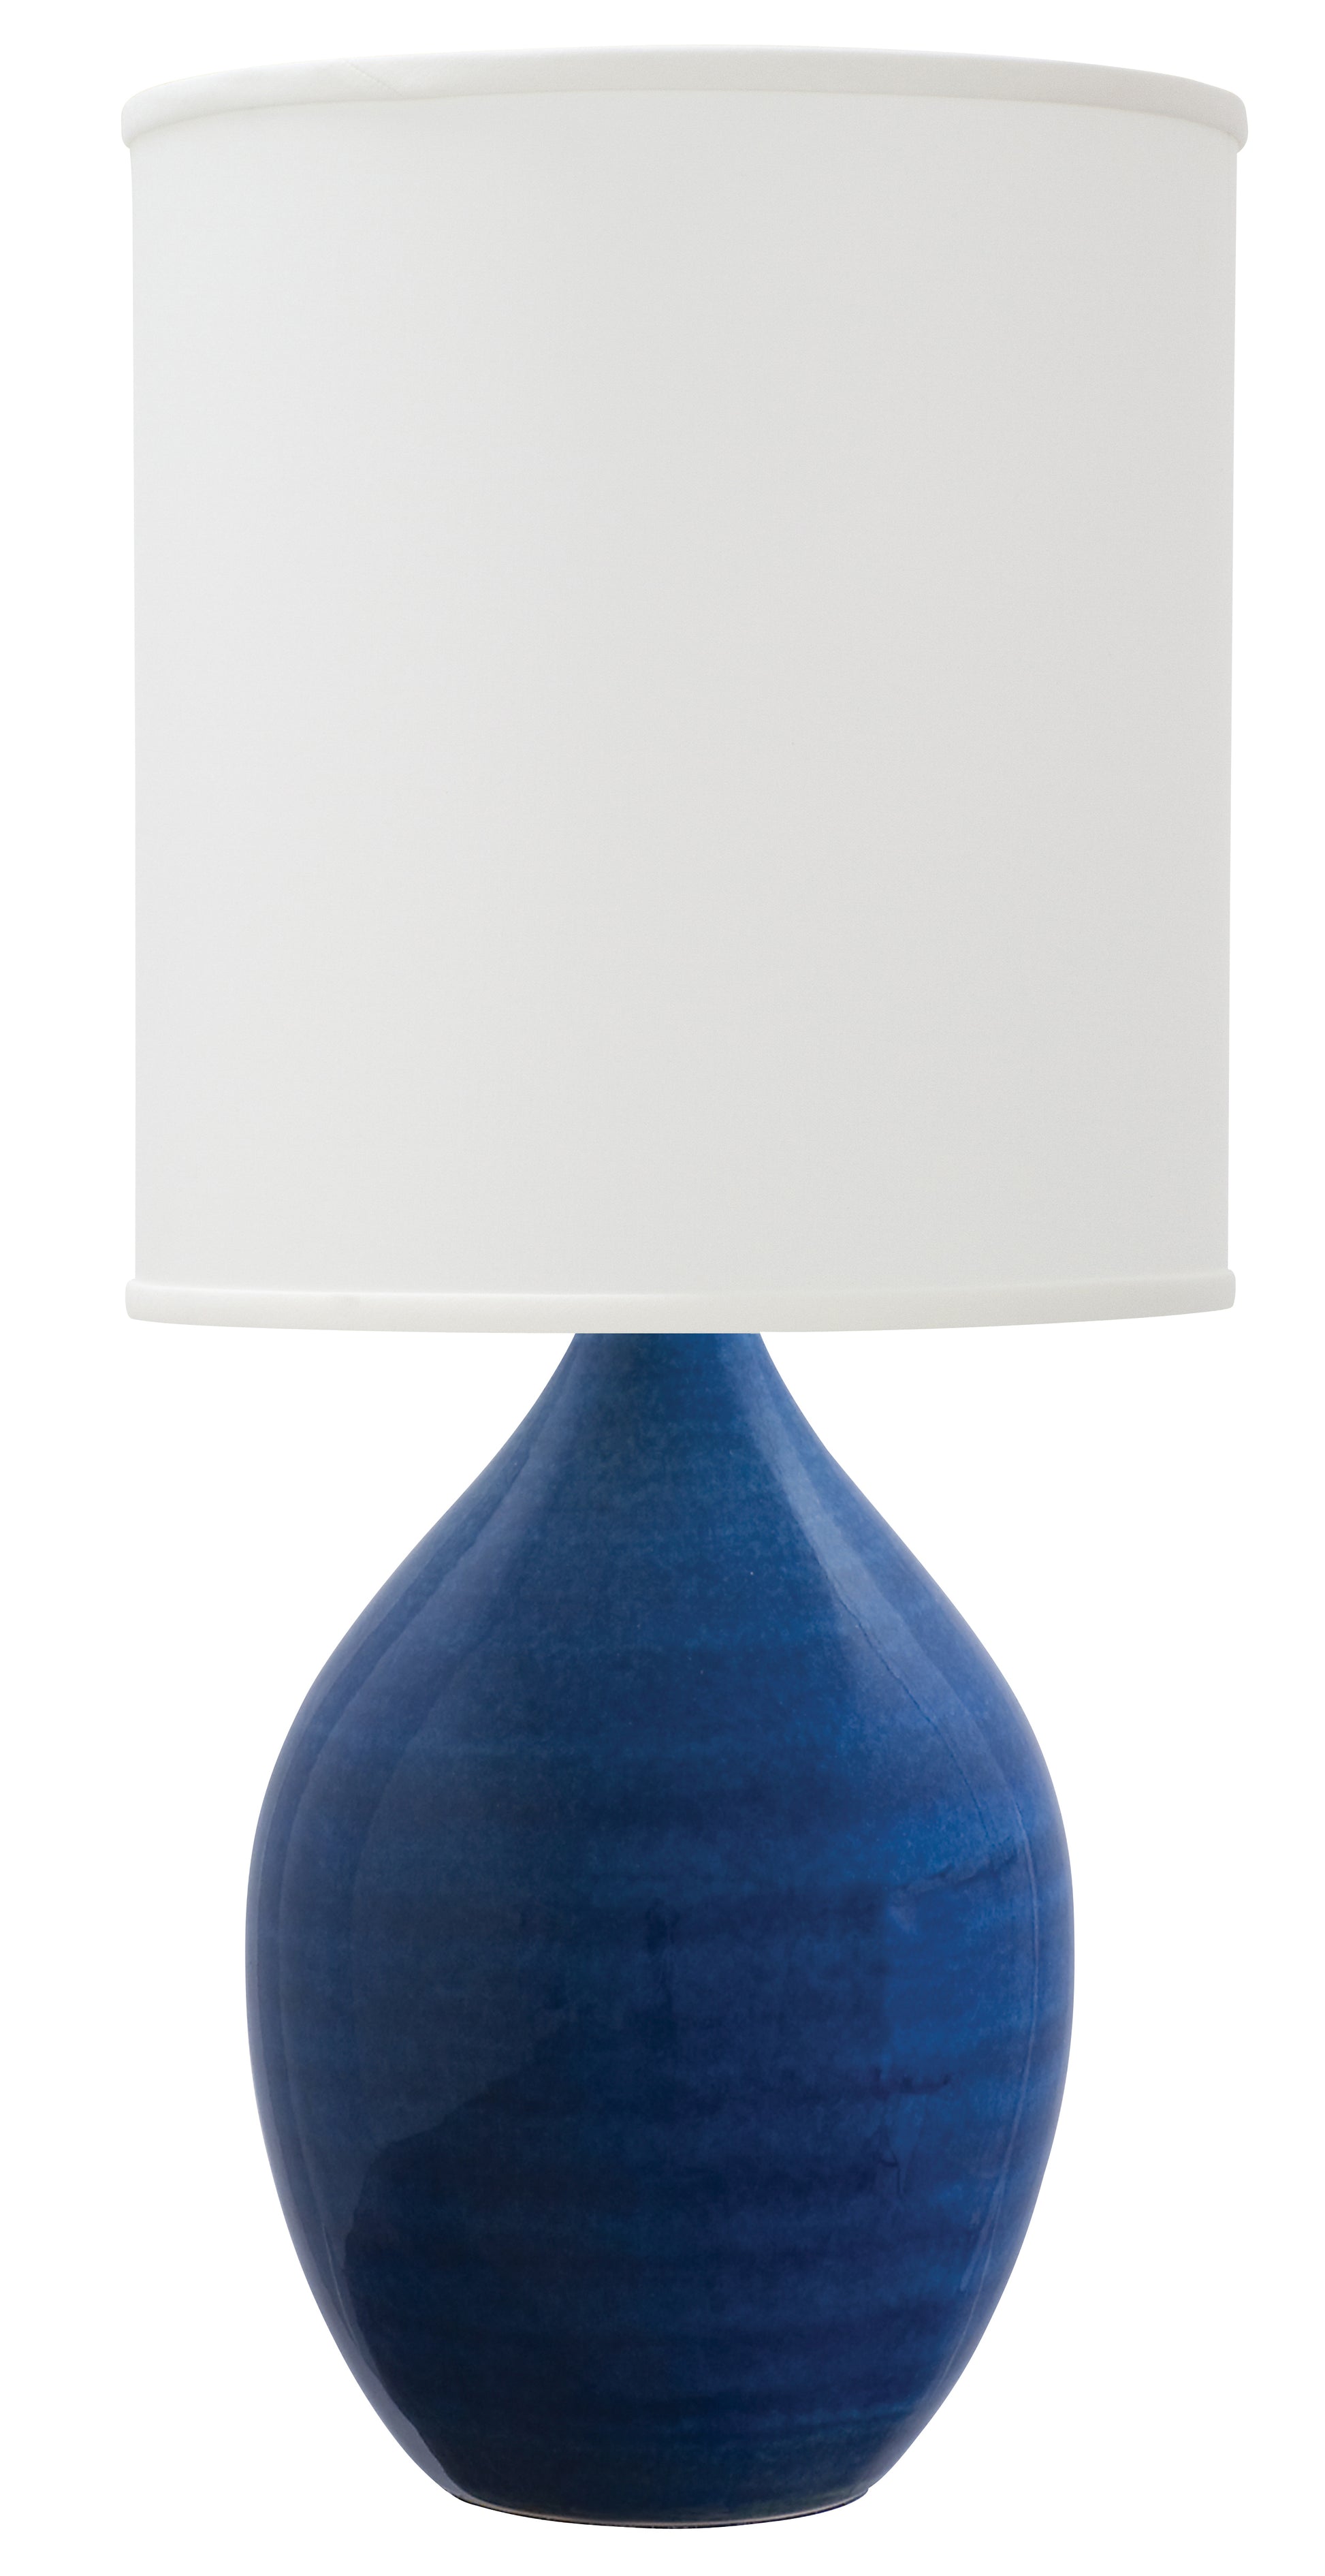 House of Troy Scatchard 20.5" Stoneware Table Lamp Blue Gloss GS201-BG